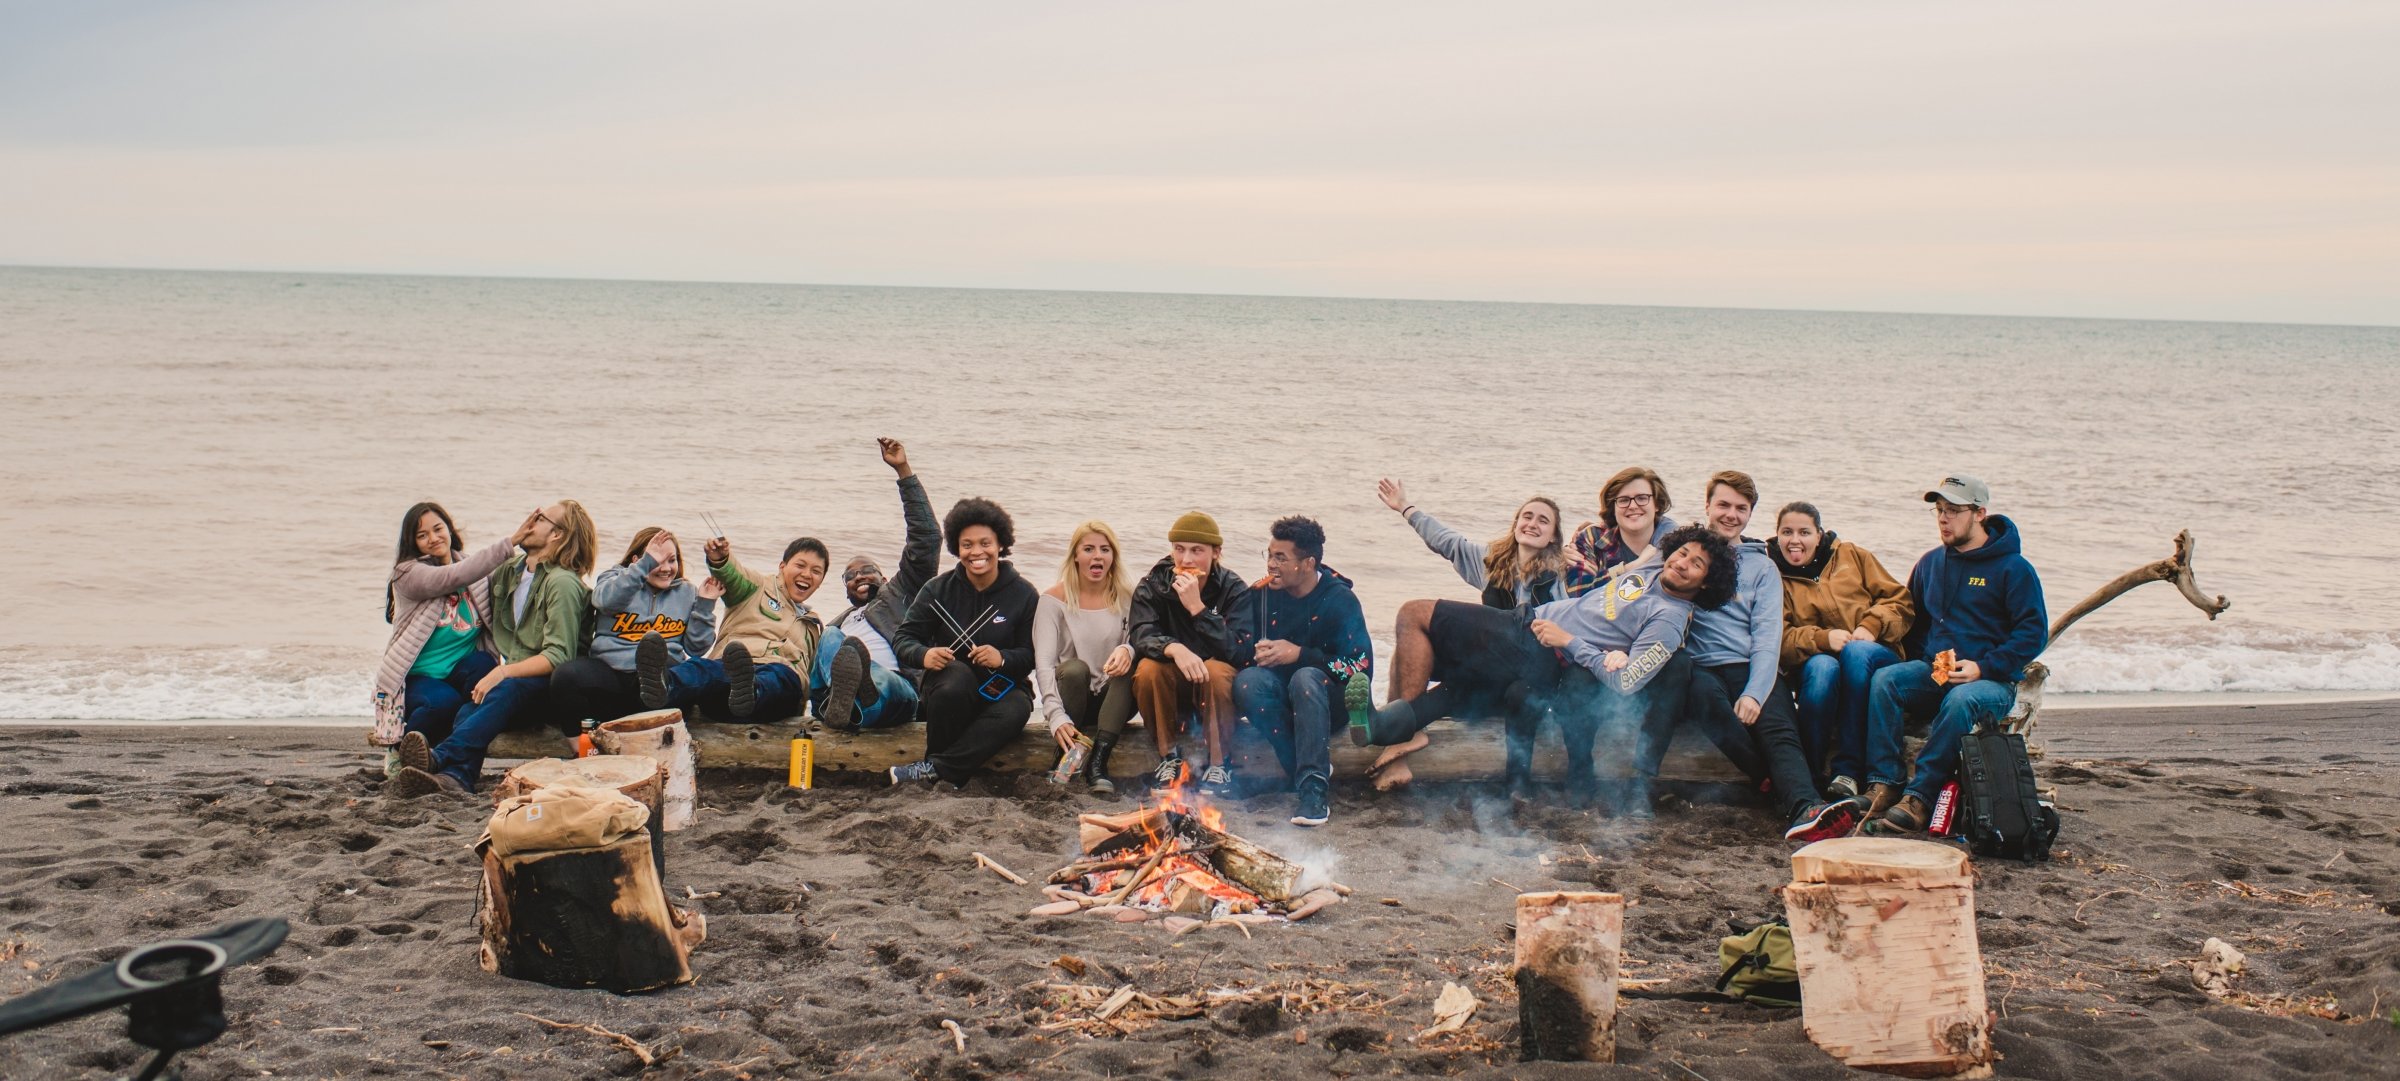 A diverse group of laughing students sits together on a log on a sandy beach by a campfire.